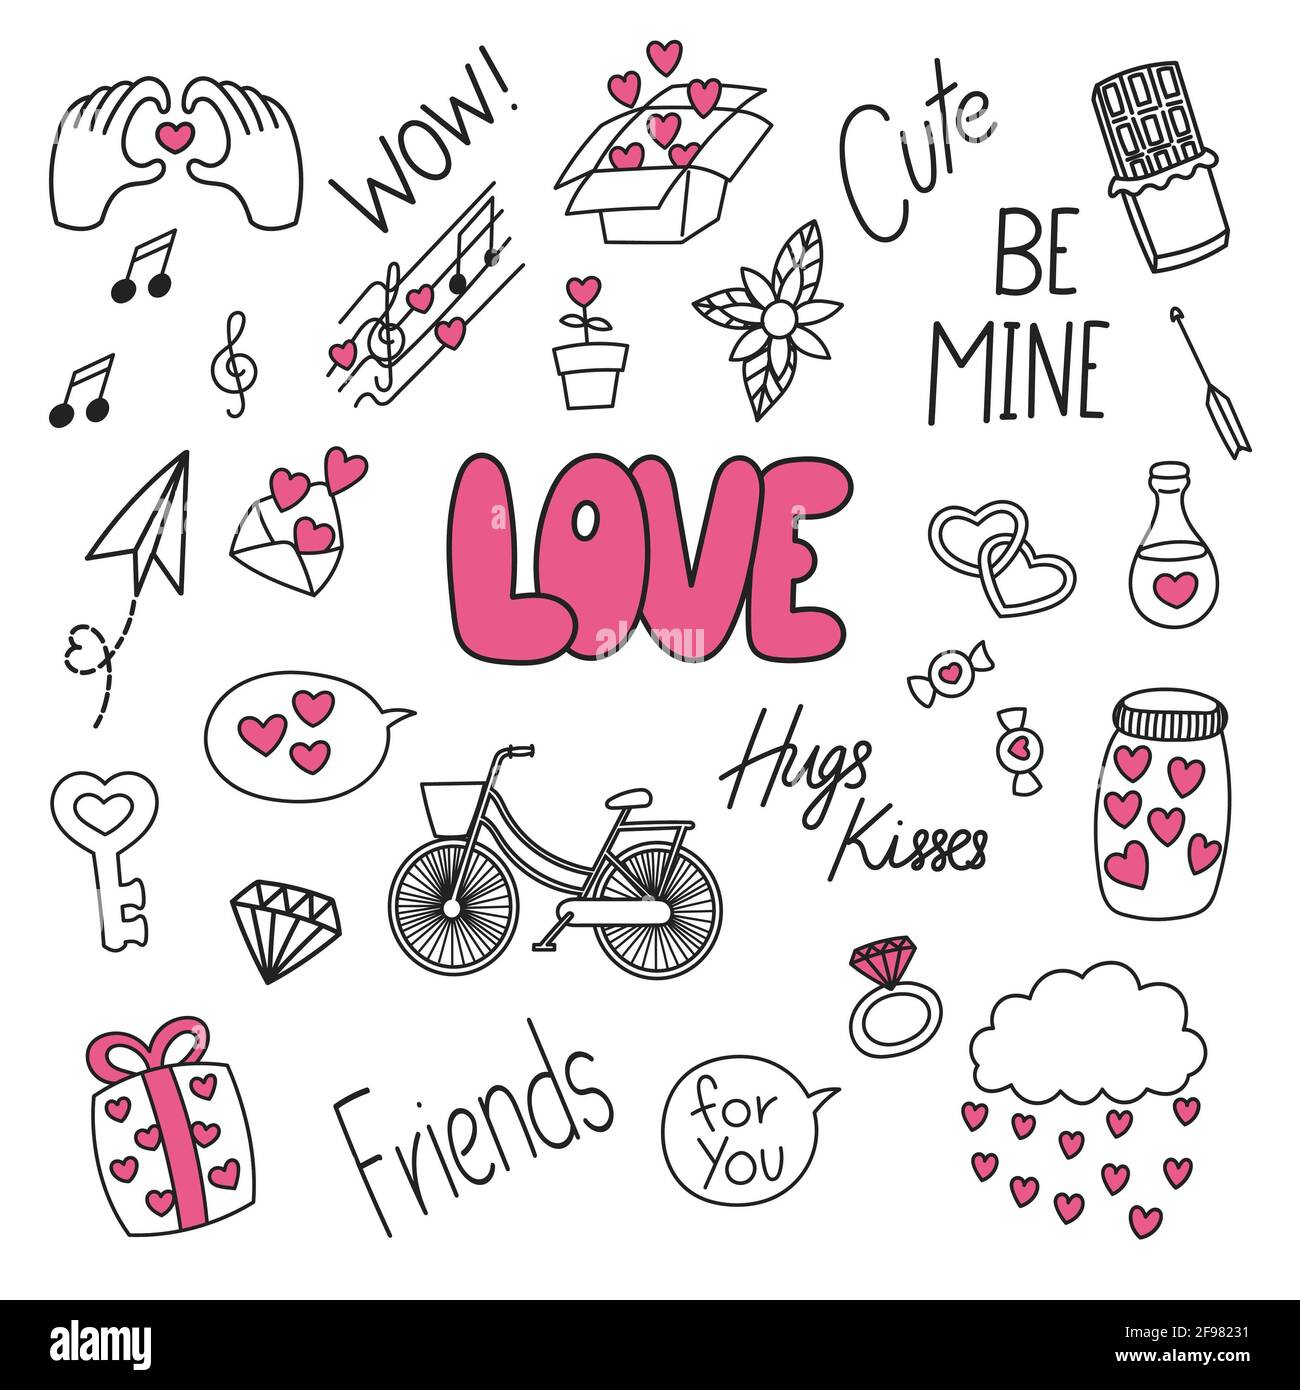 Cute sticker pack with love related images and icons isolated on a